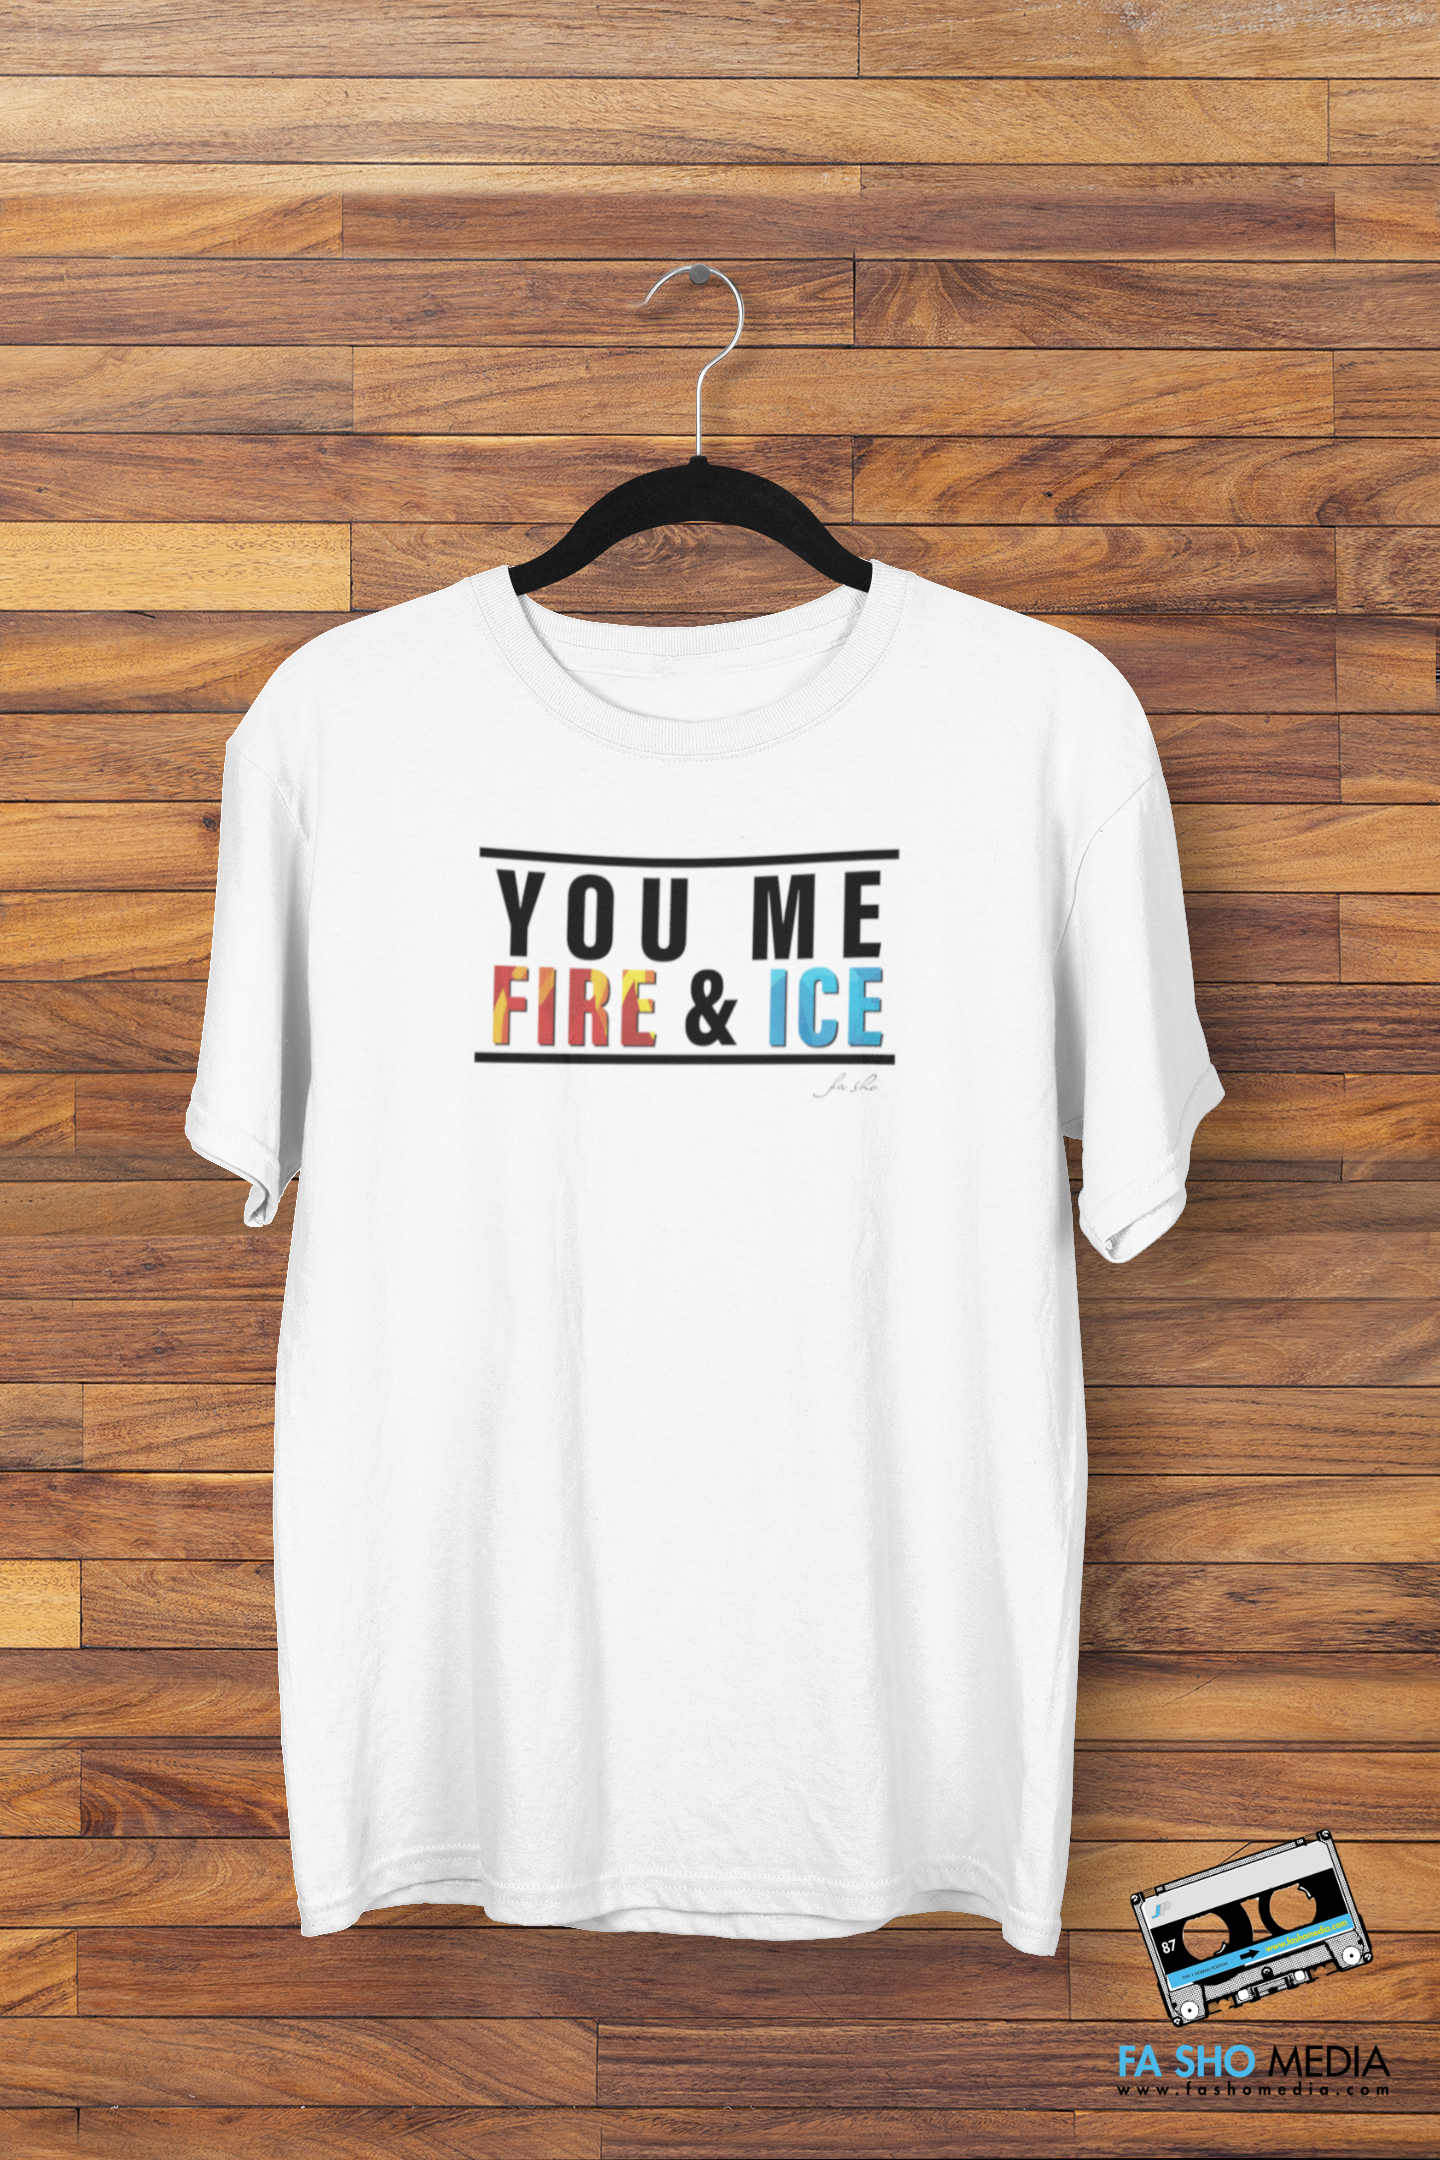 Fire and Ice Shirt (Men's)